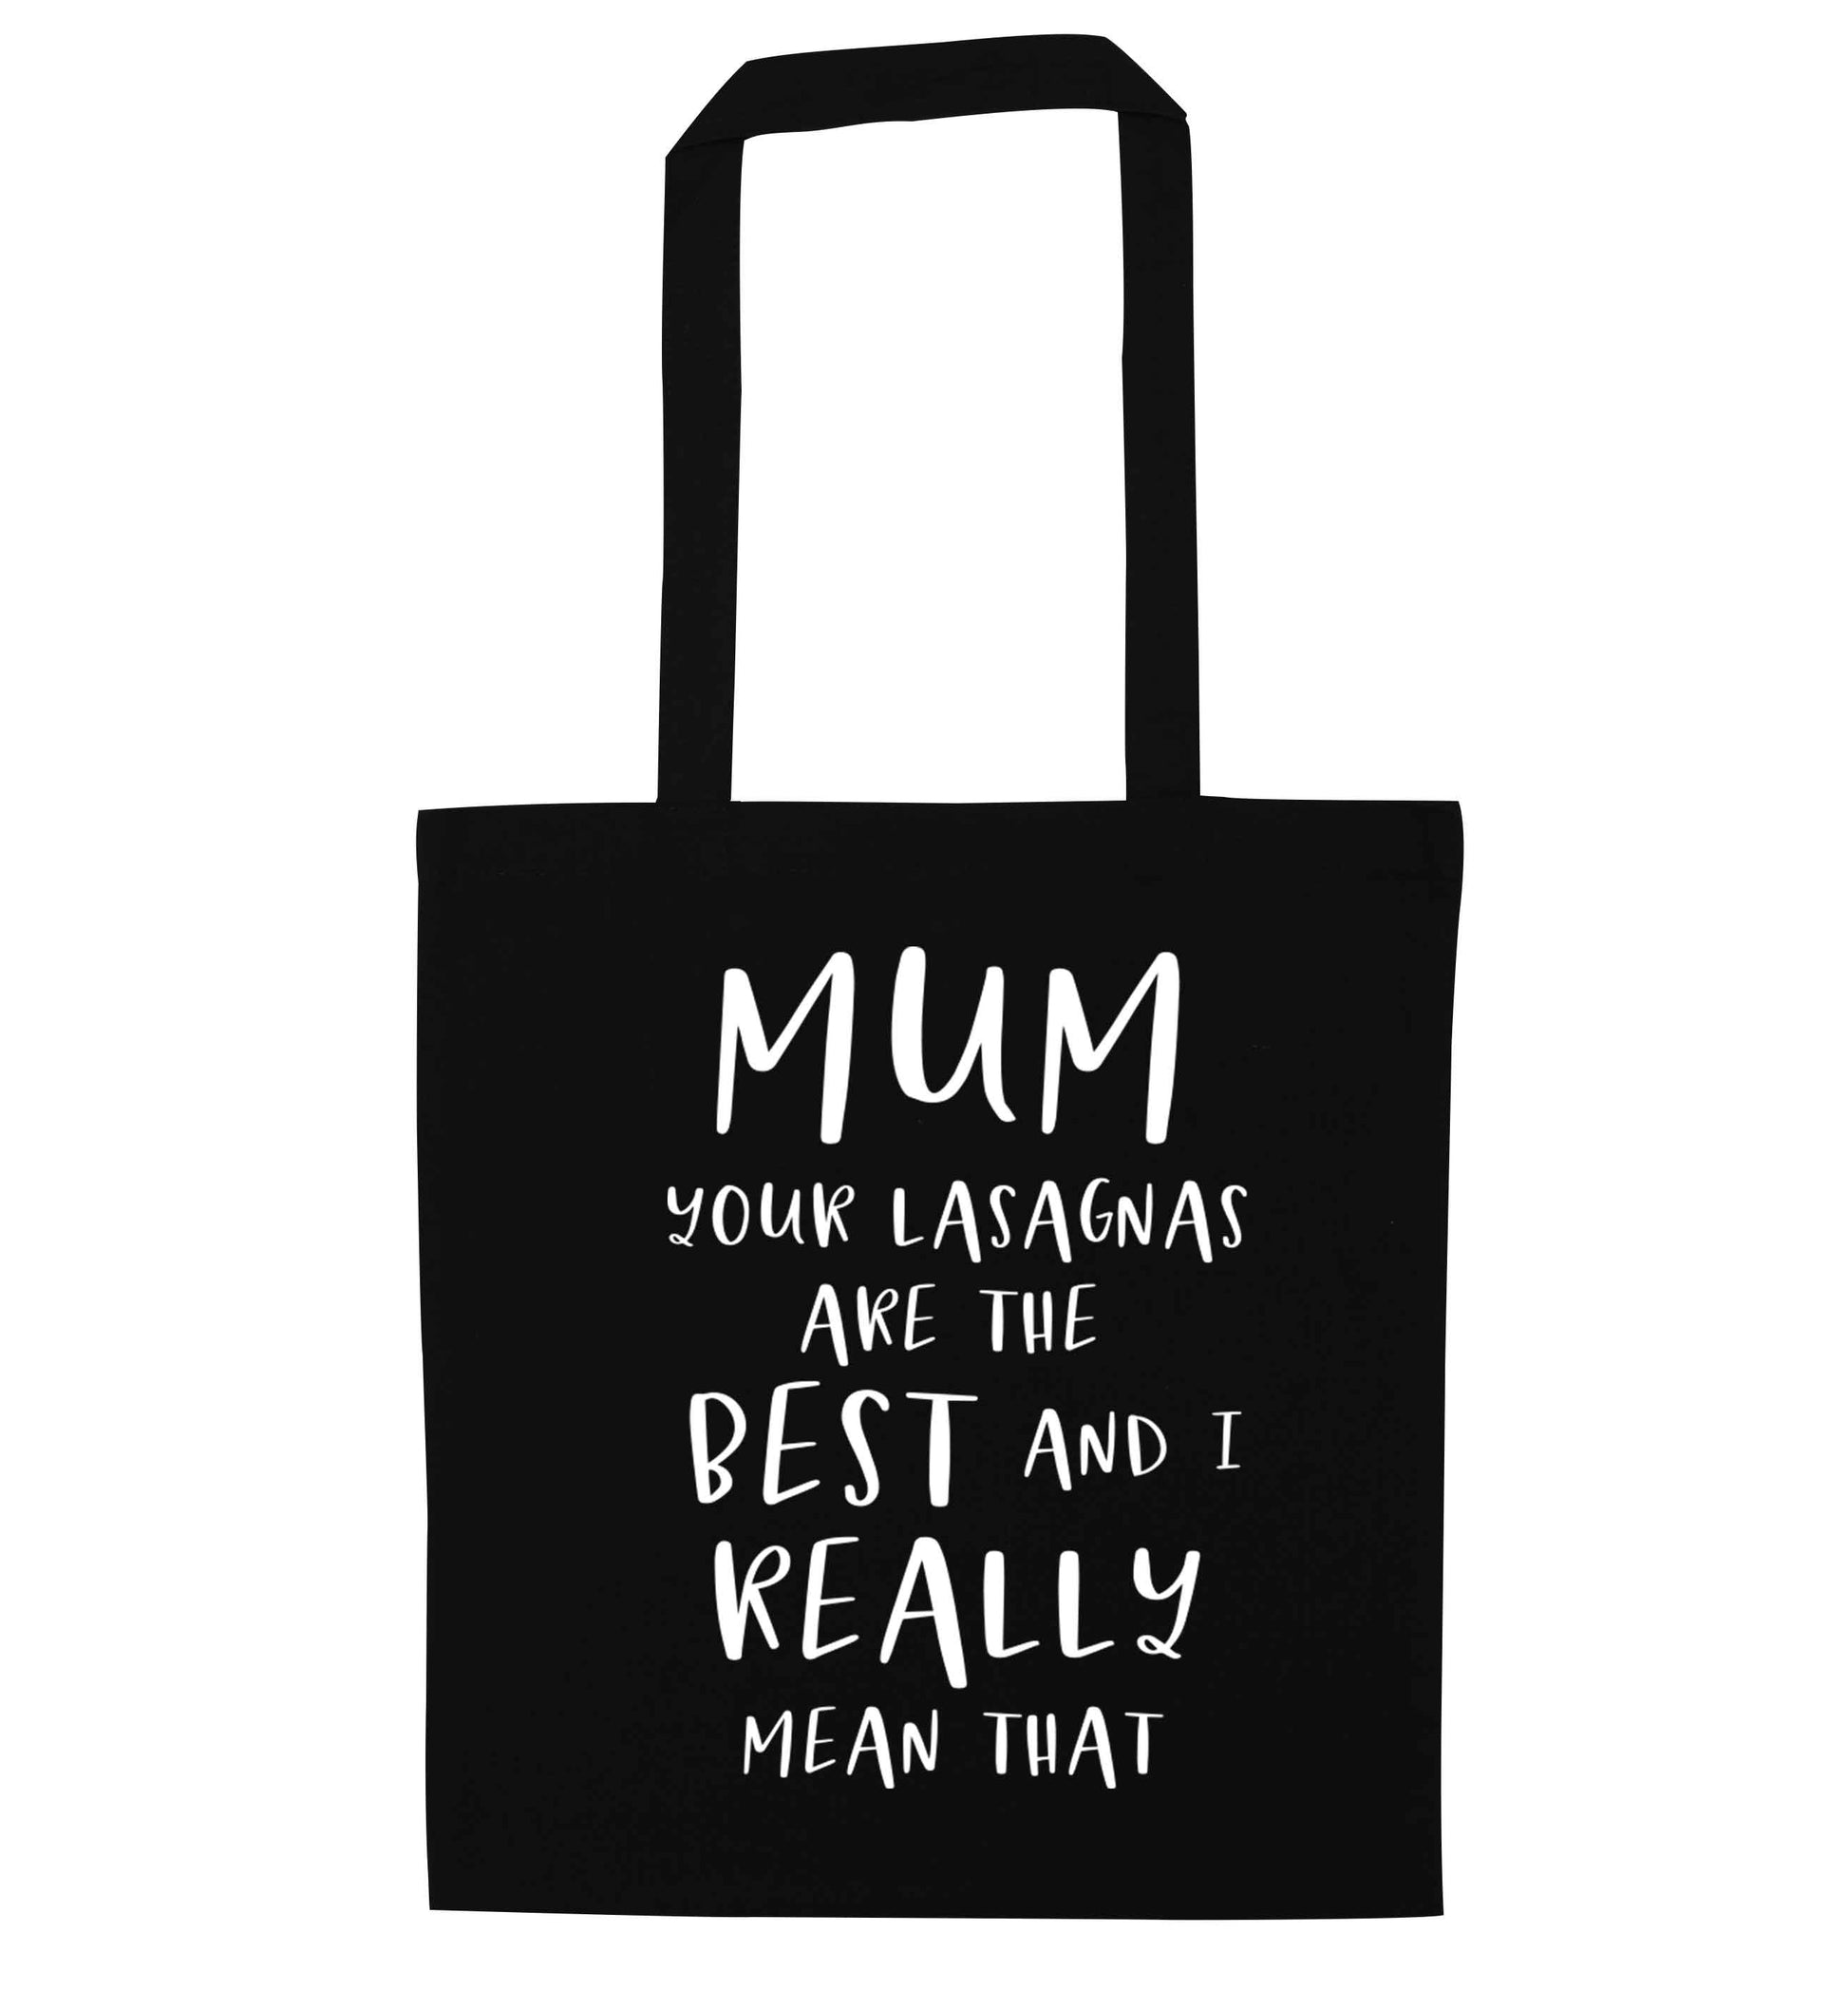 Funny gifts for your mum on mother's dayor her birthday! Mum your lasagnas are the best and I really mean that black tote bag